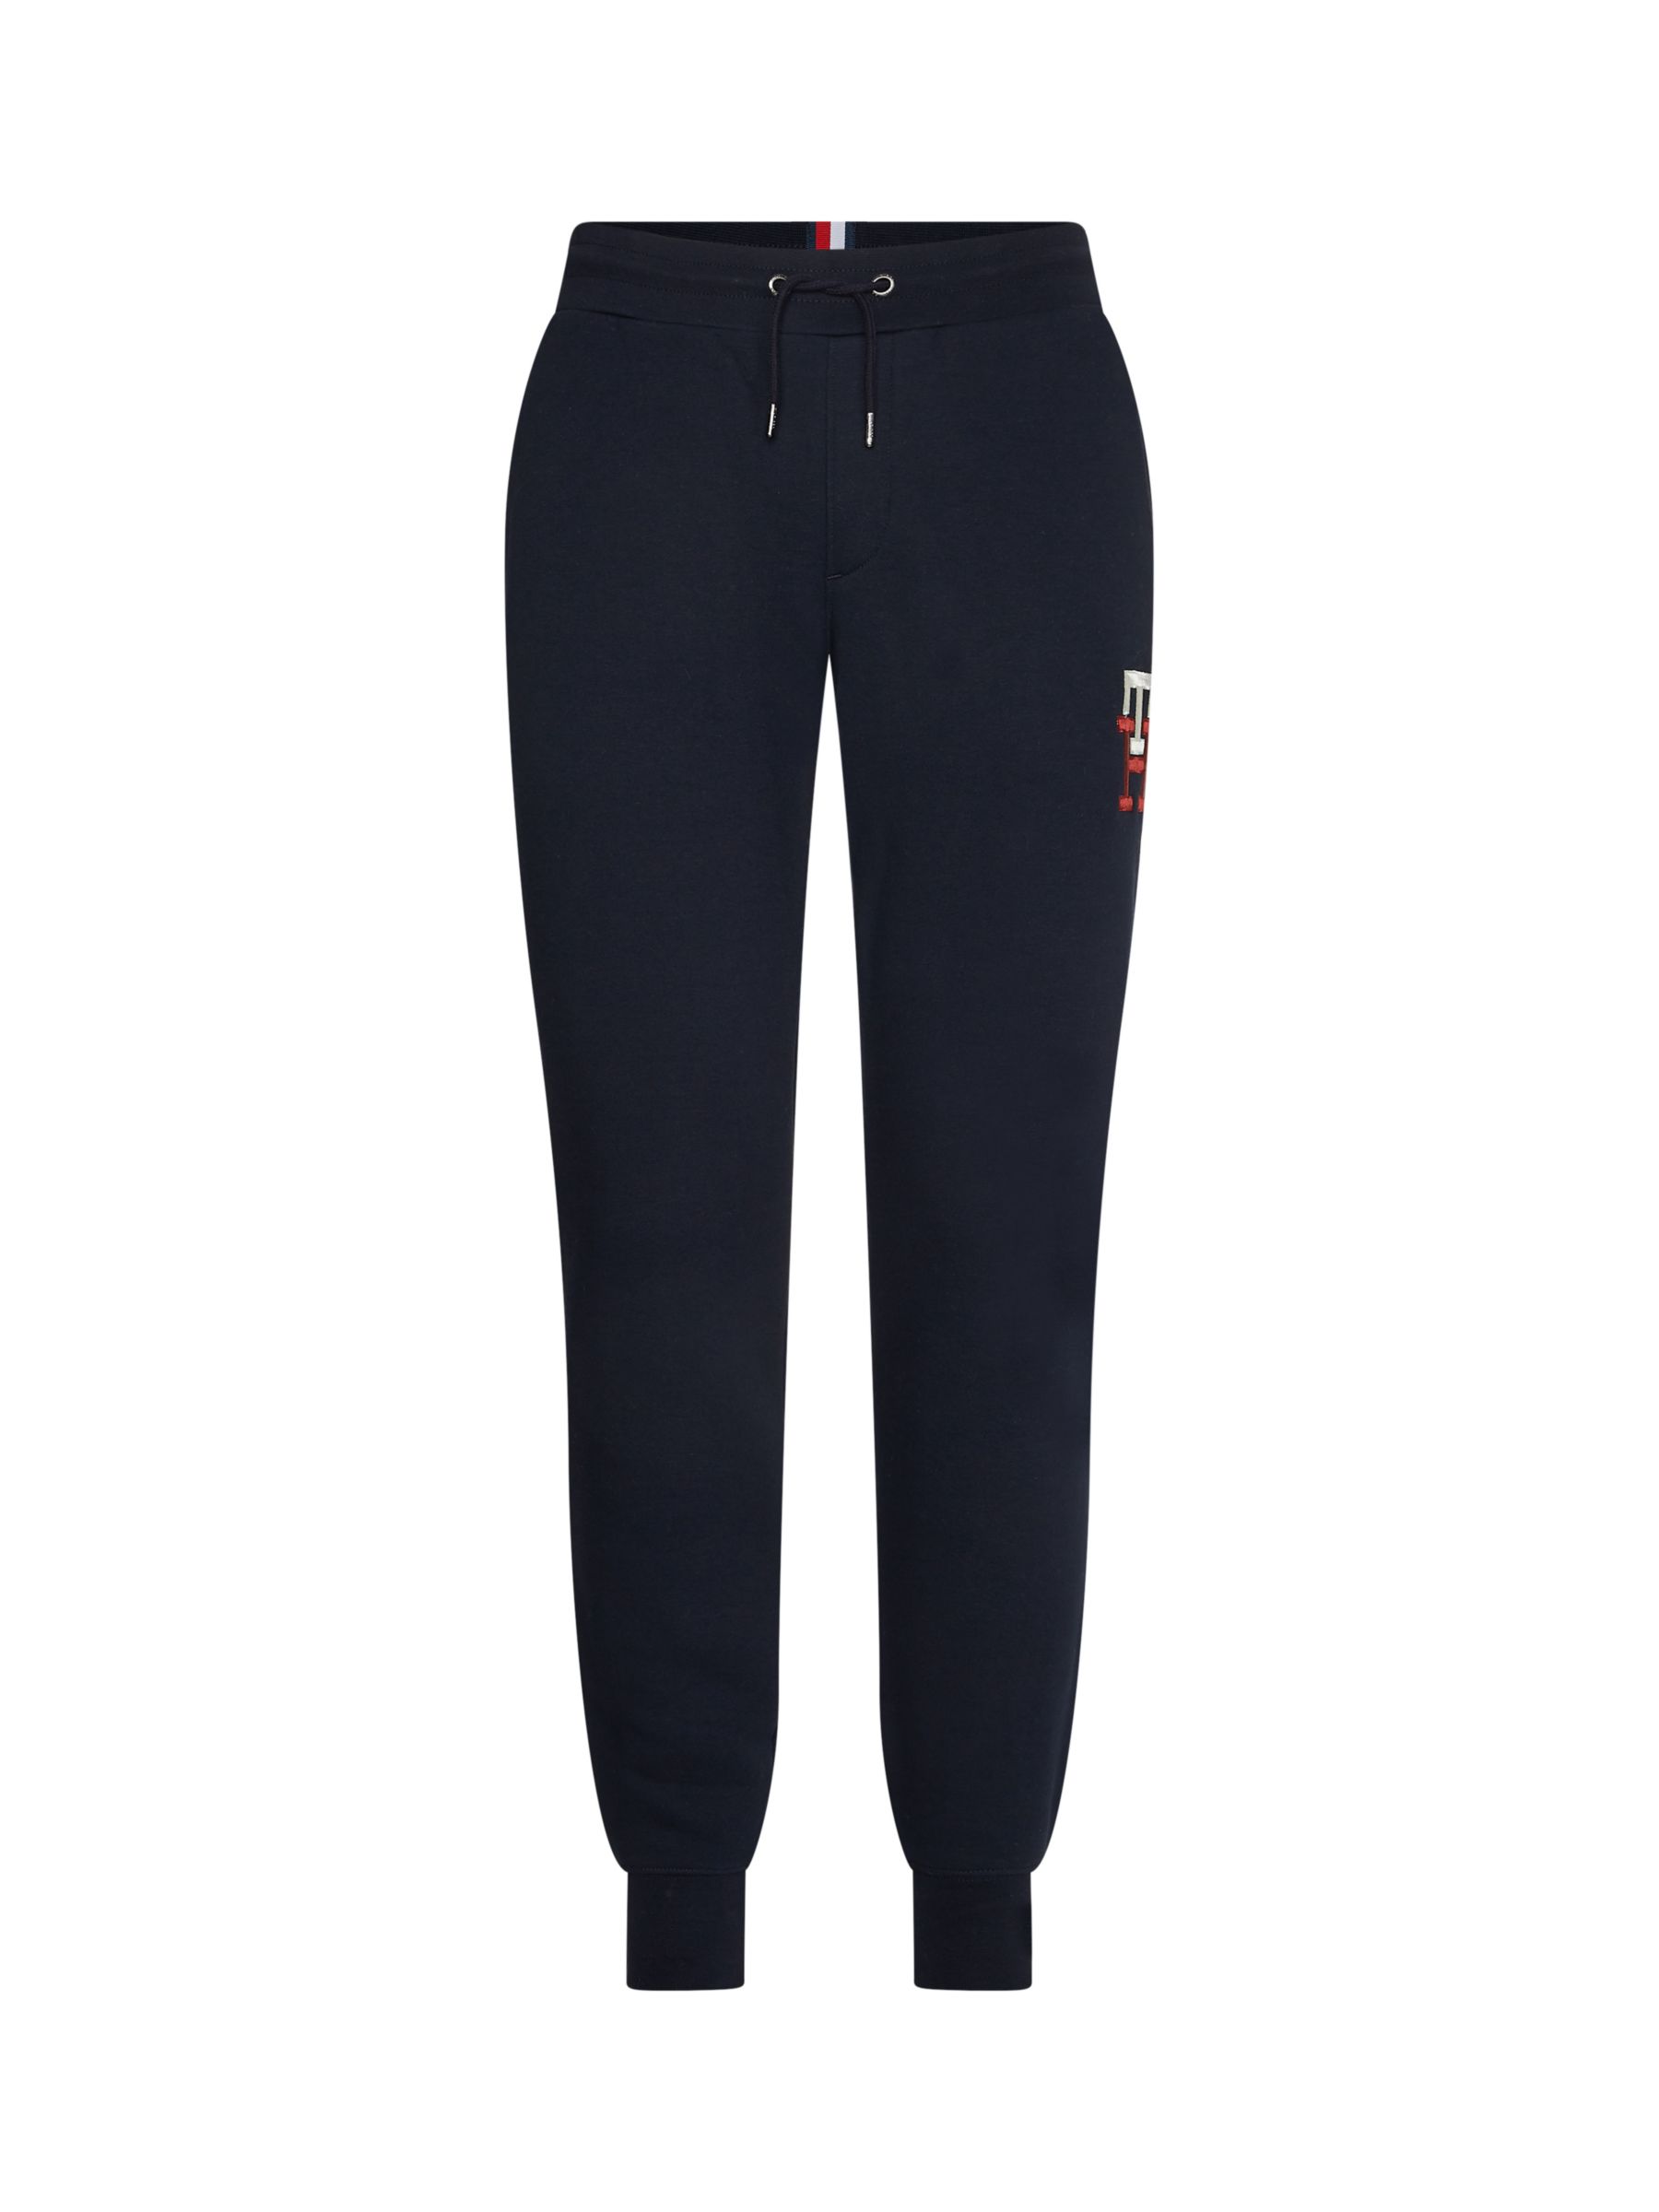 Tommy Hilfiger Sport Women's Smooth Knit Joggers / Tracksuit Pants - Black